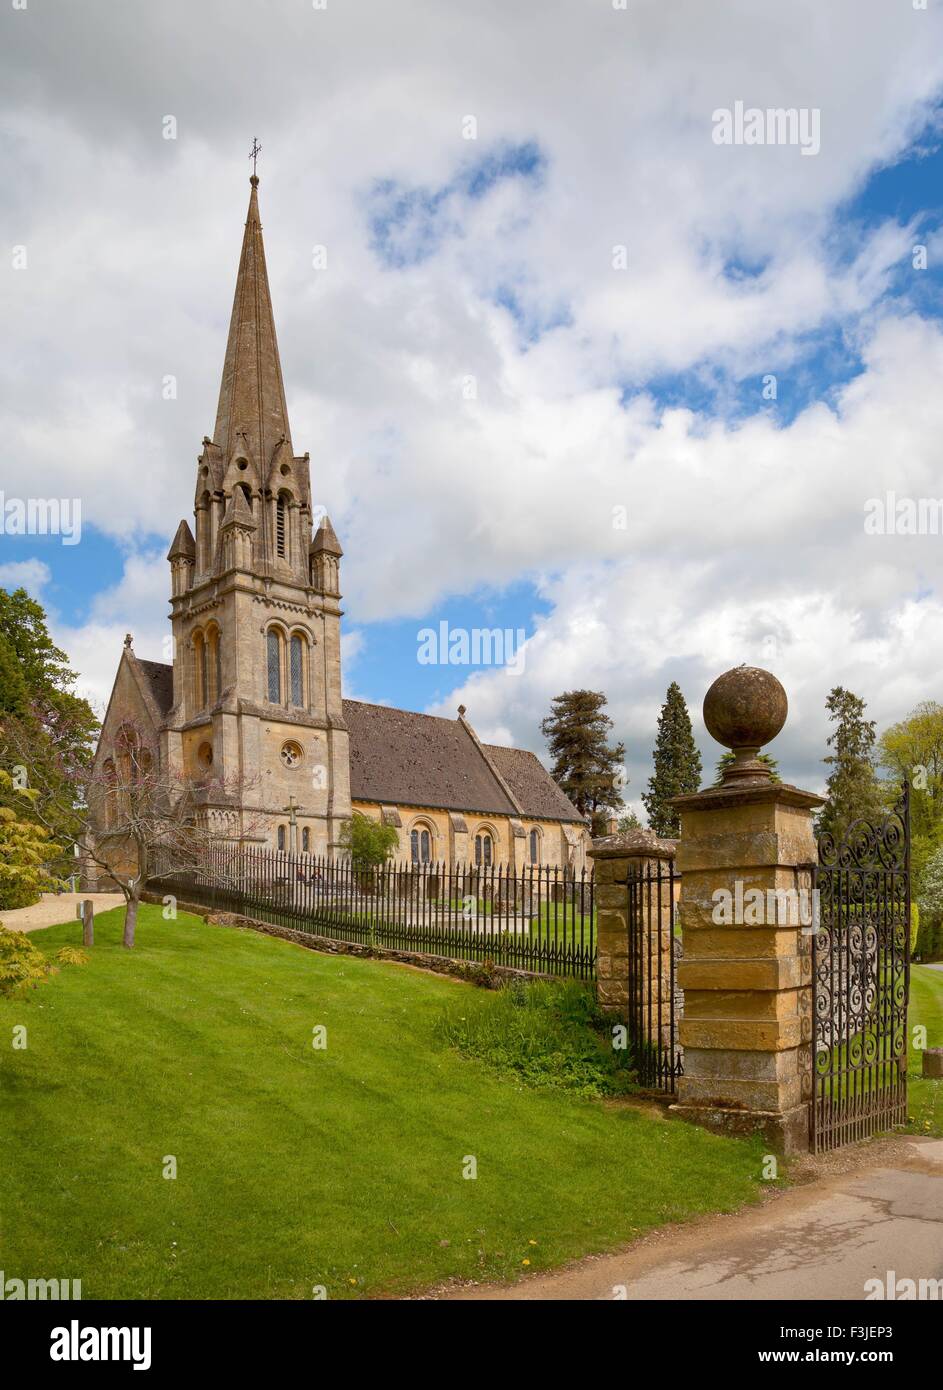 Cotswold Church in the village of Batsford, Gloucestershire, England. Stock Photo